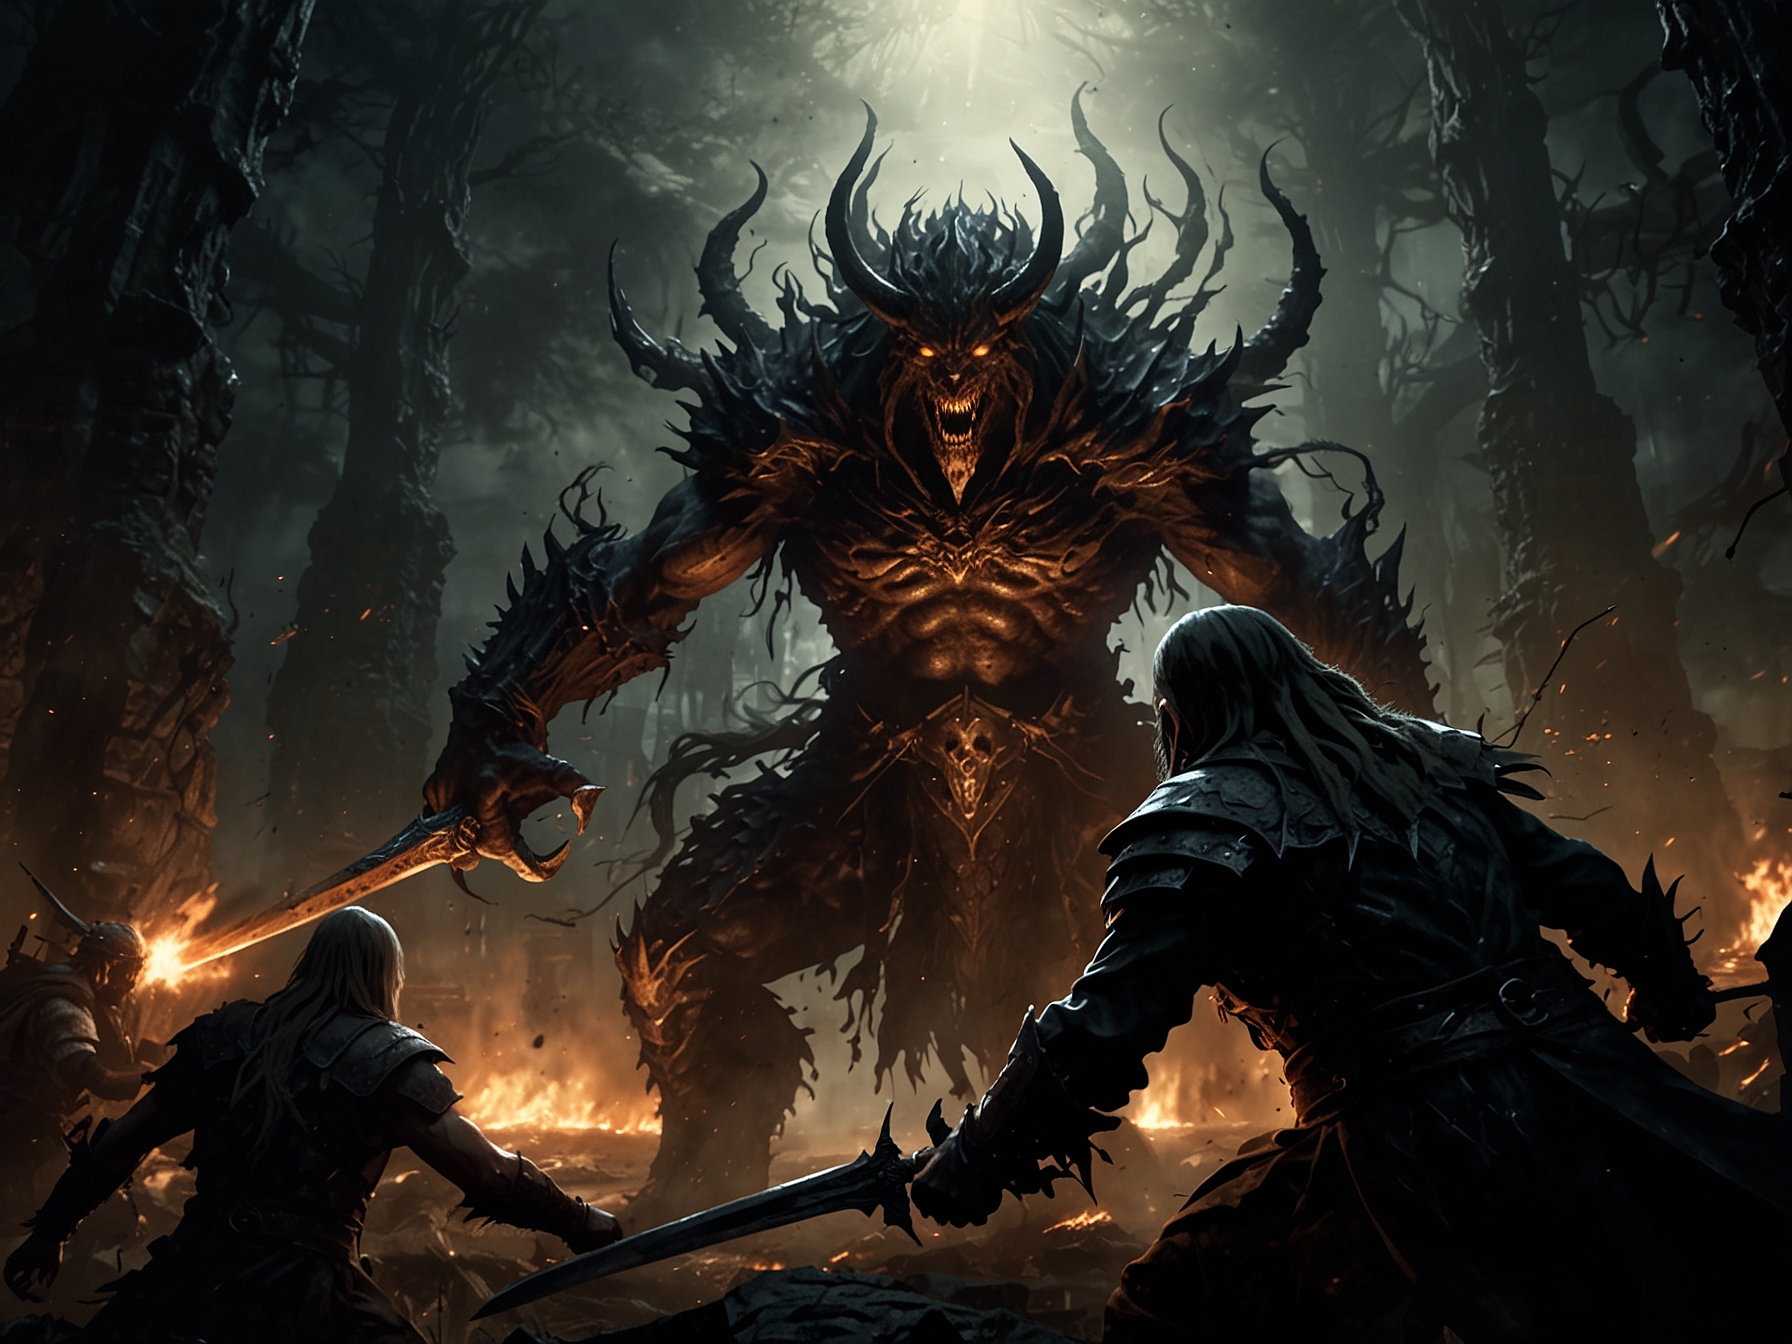 In-game screenshot of an intense boss battle from Elden Ring’s Shadow of the Erdtree DLC, showing a high-level player skillfully dodging attacks while companions provide support in a dark, foreboding environment.